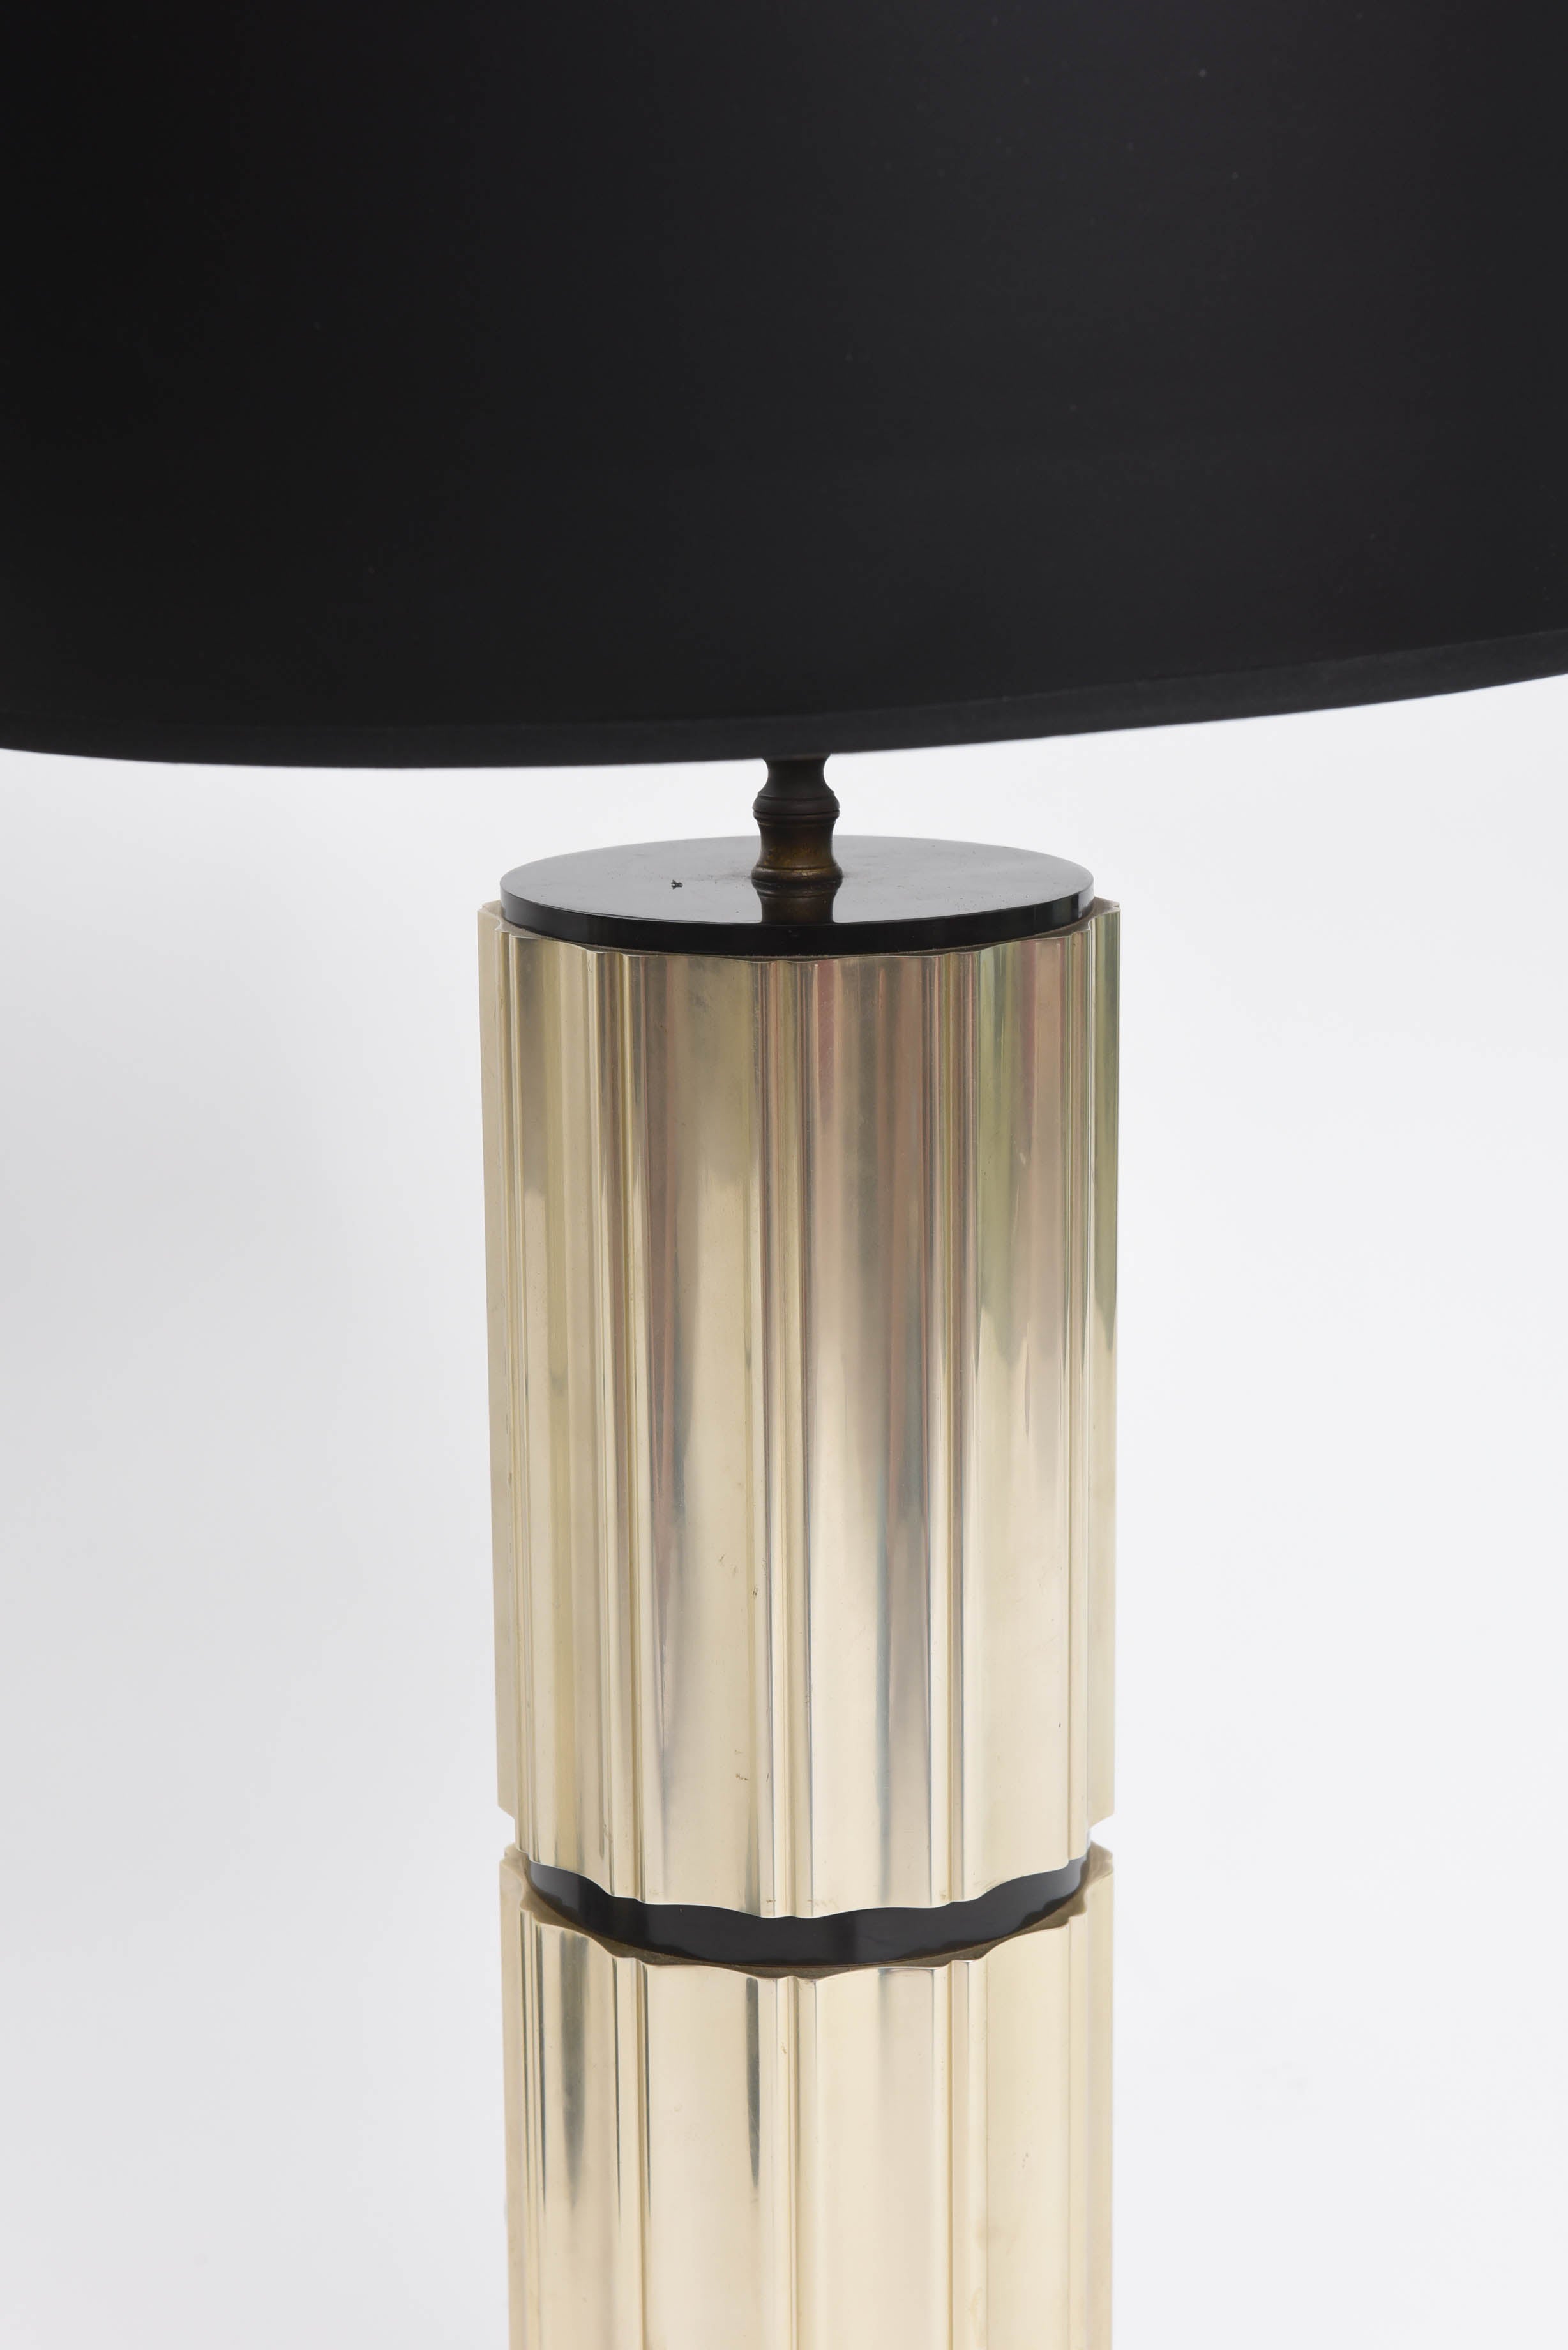 A handsome combination of a nickel surface with black lacquer accents.
Classical Art Deco form.